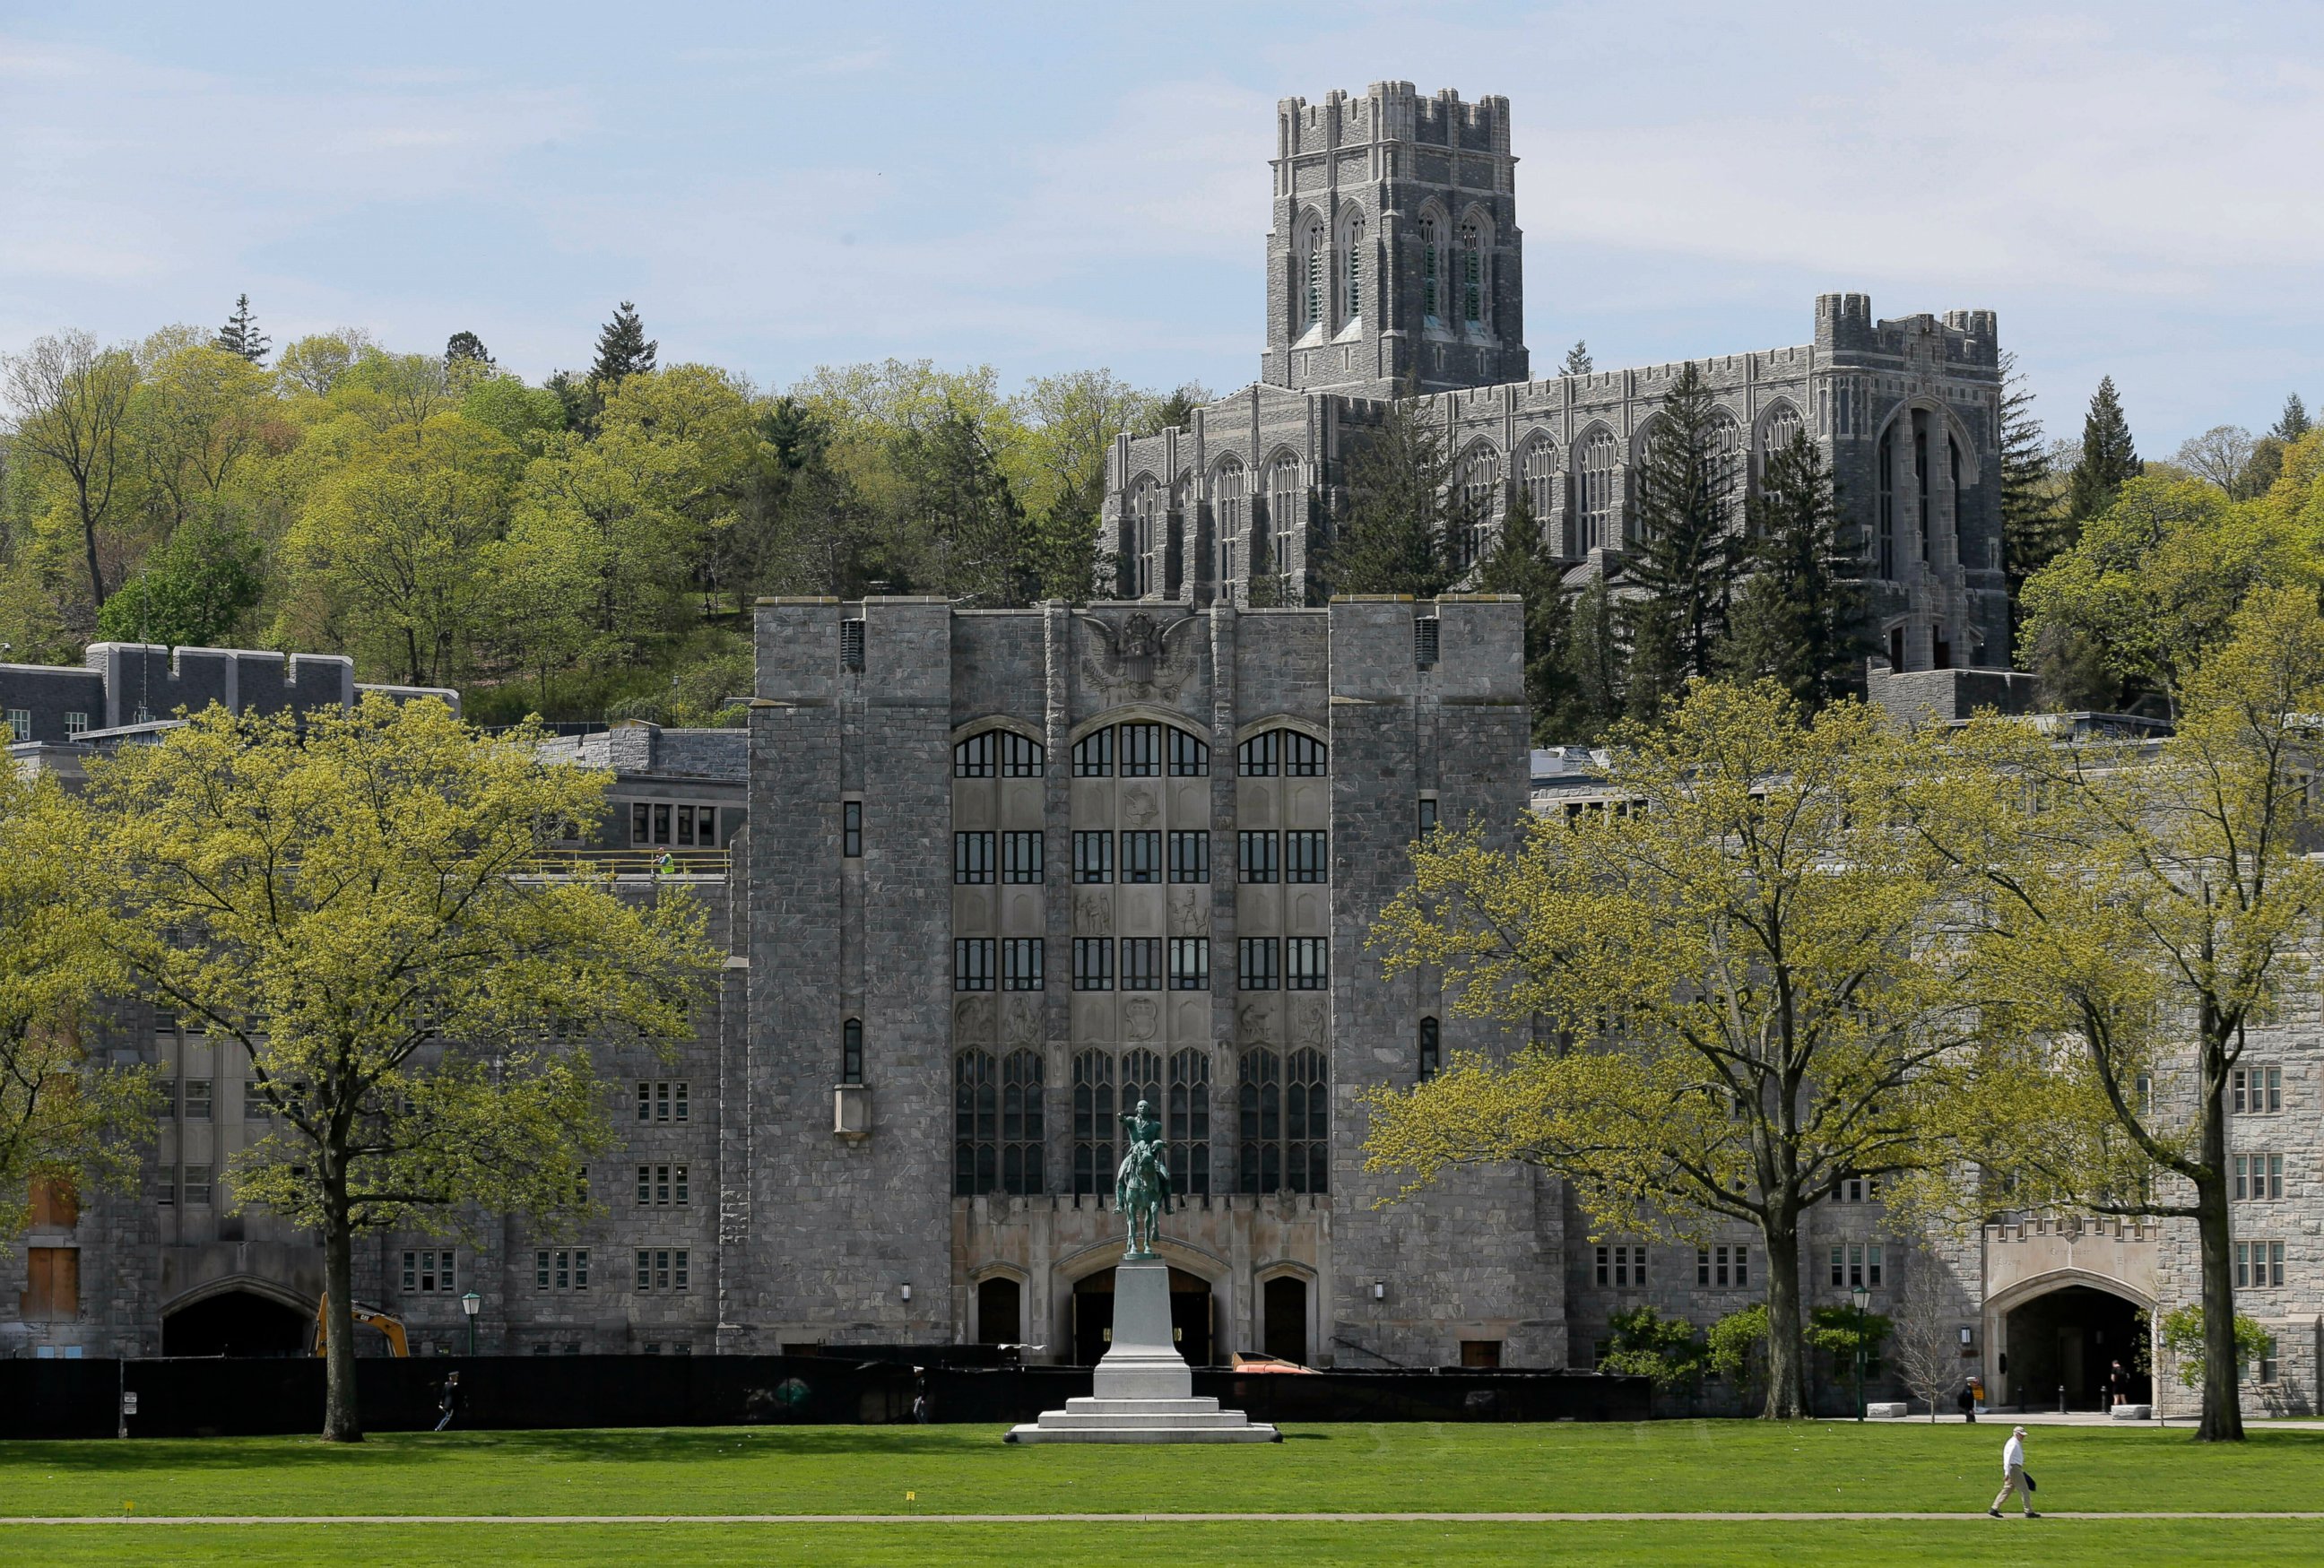 PHOTO: This May 2, 2019 file photo shows a view of the United States Military Academy at West Point, N.Y.